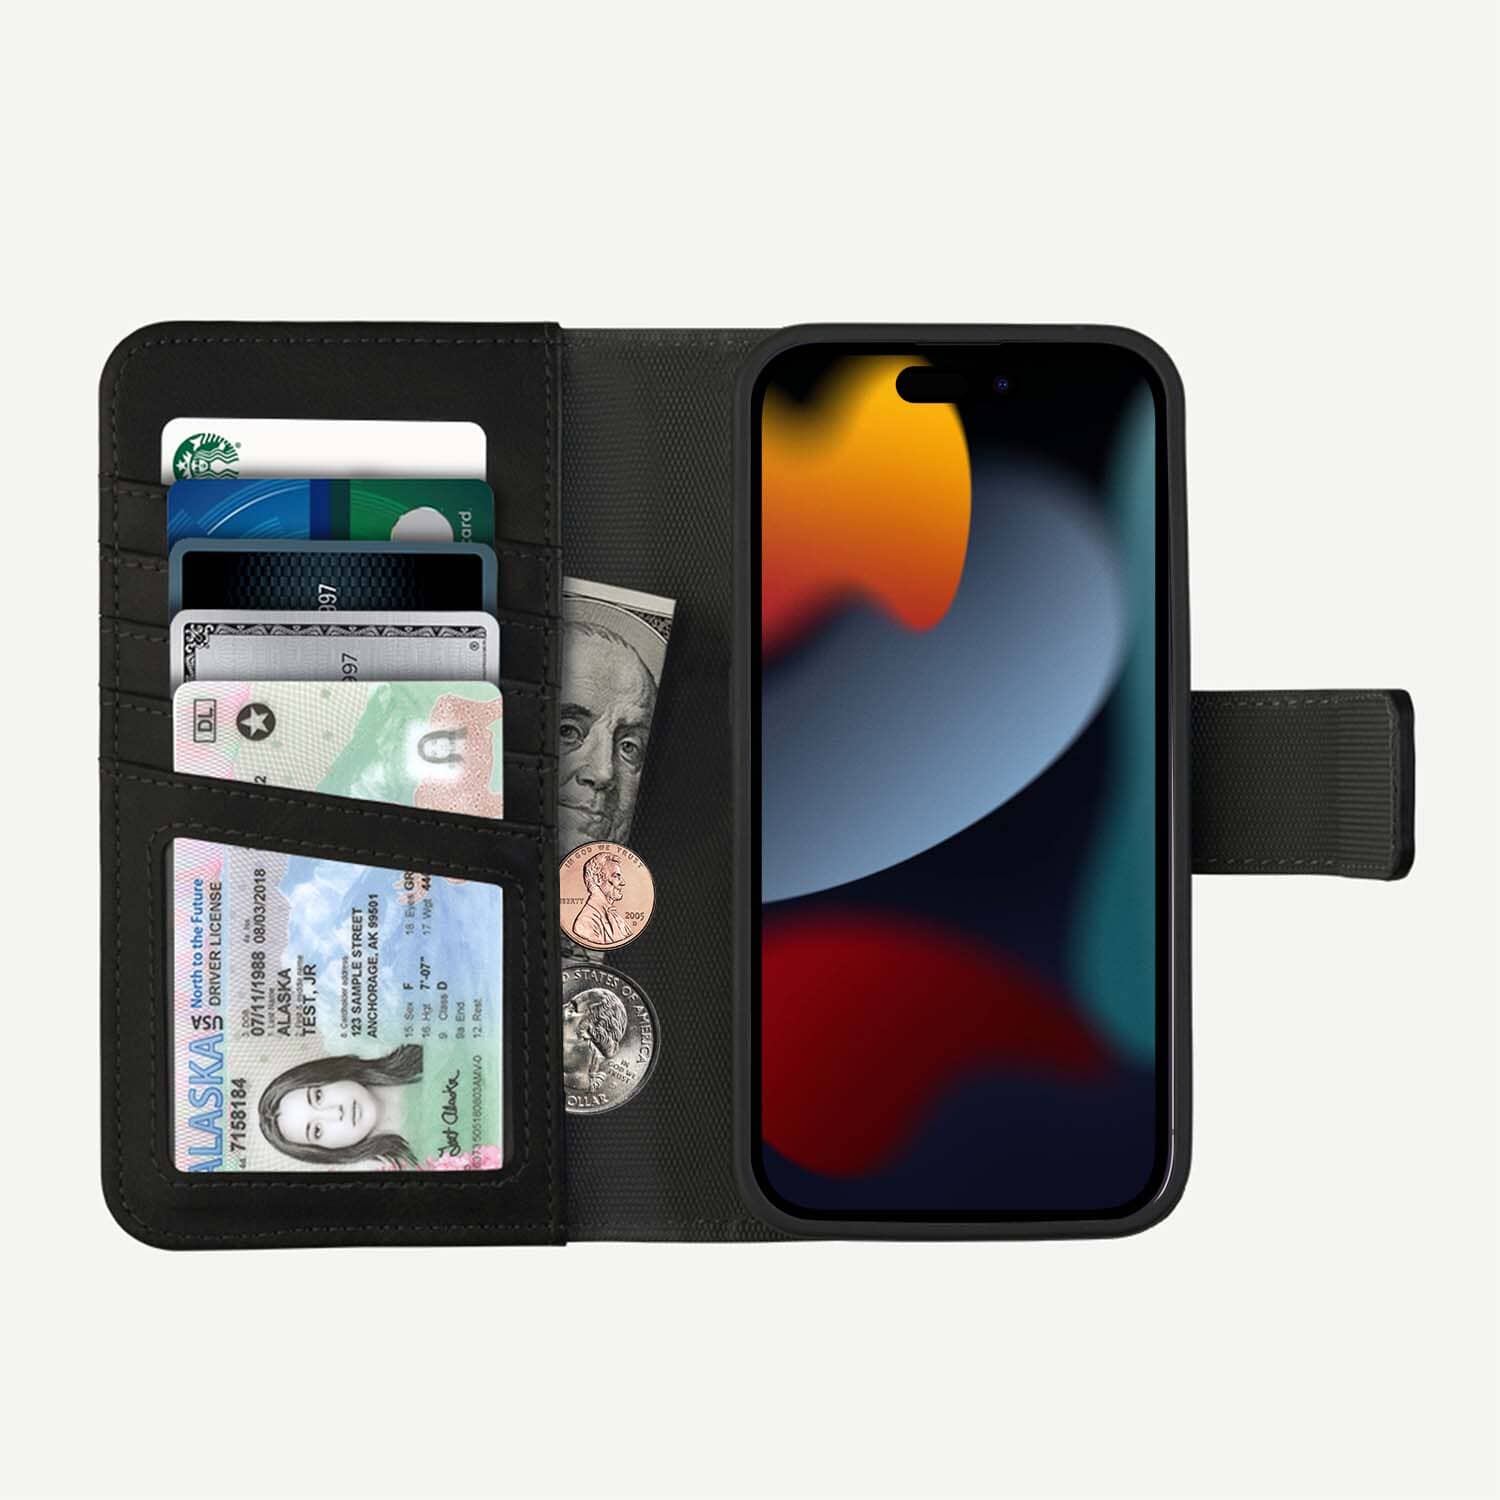 iPhone 11Pro Max Wallet Case, Magnetic Closure Detachable Leather Flip Case  Card Holders Phone Stand, iPhone 11Pro Max Case Wallet RFID Blocking Phone